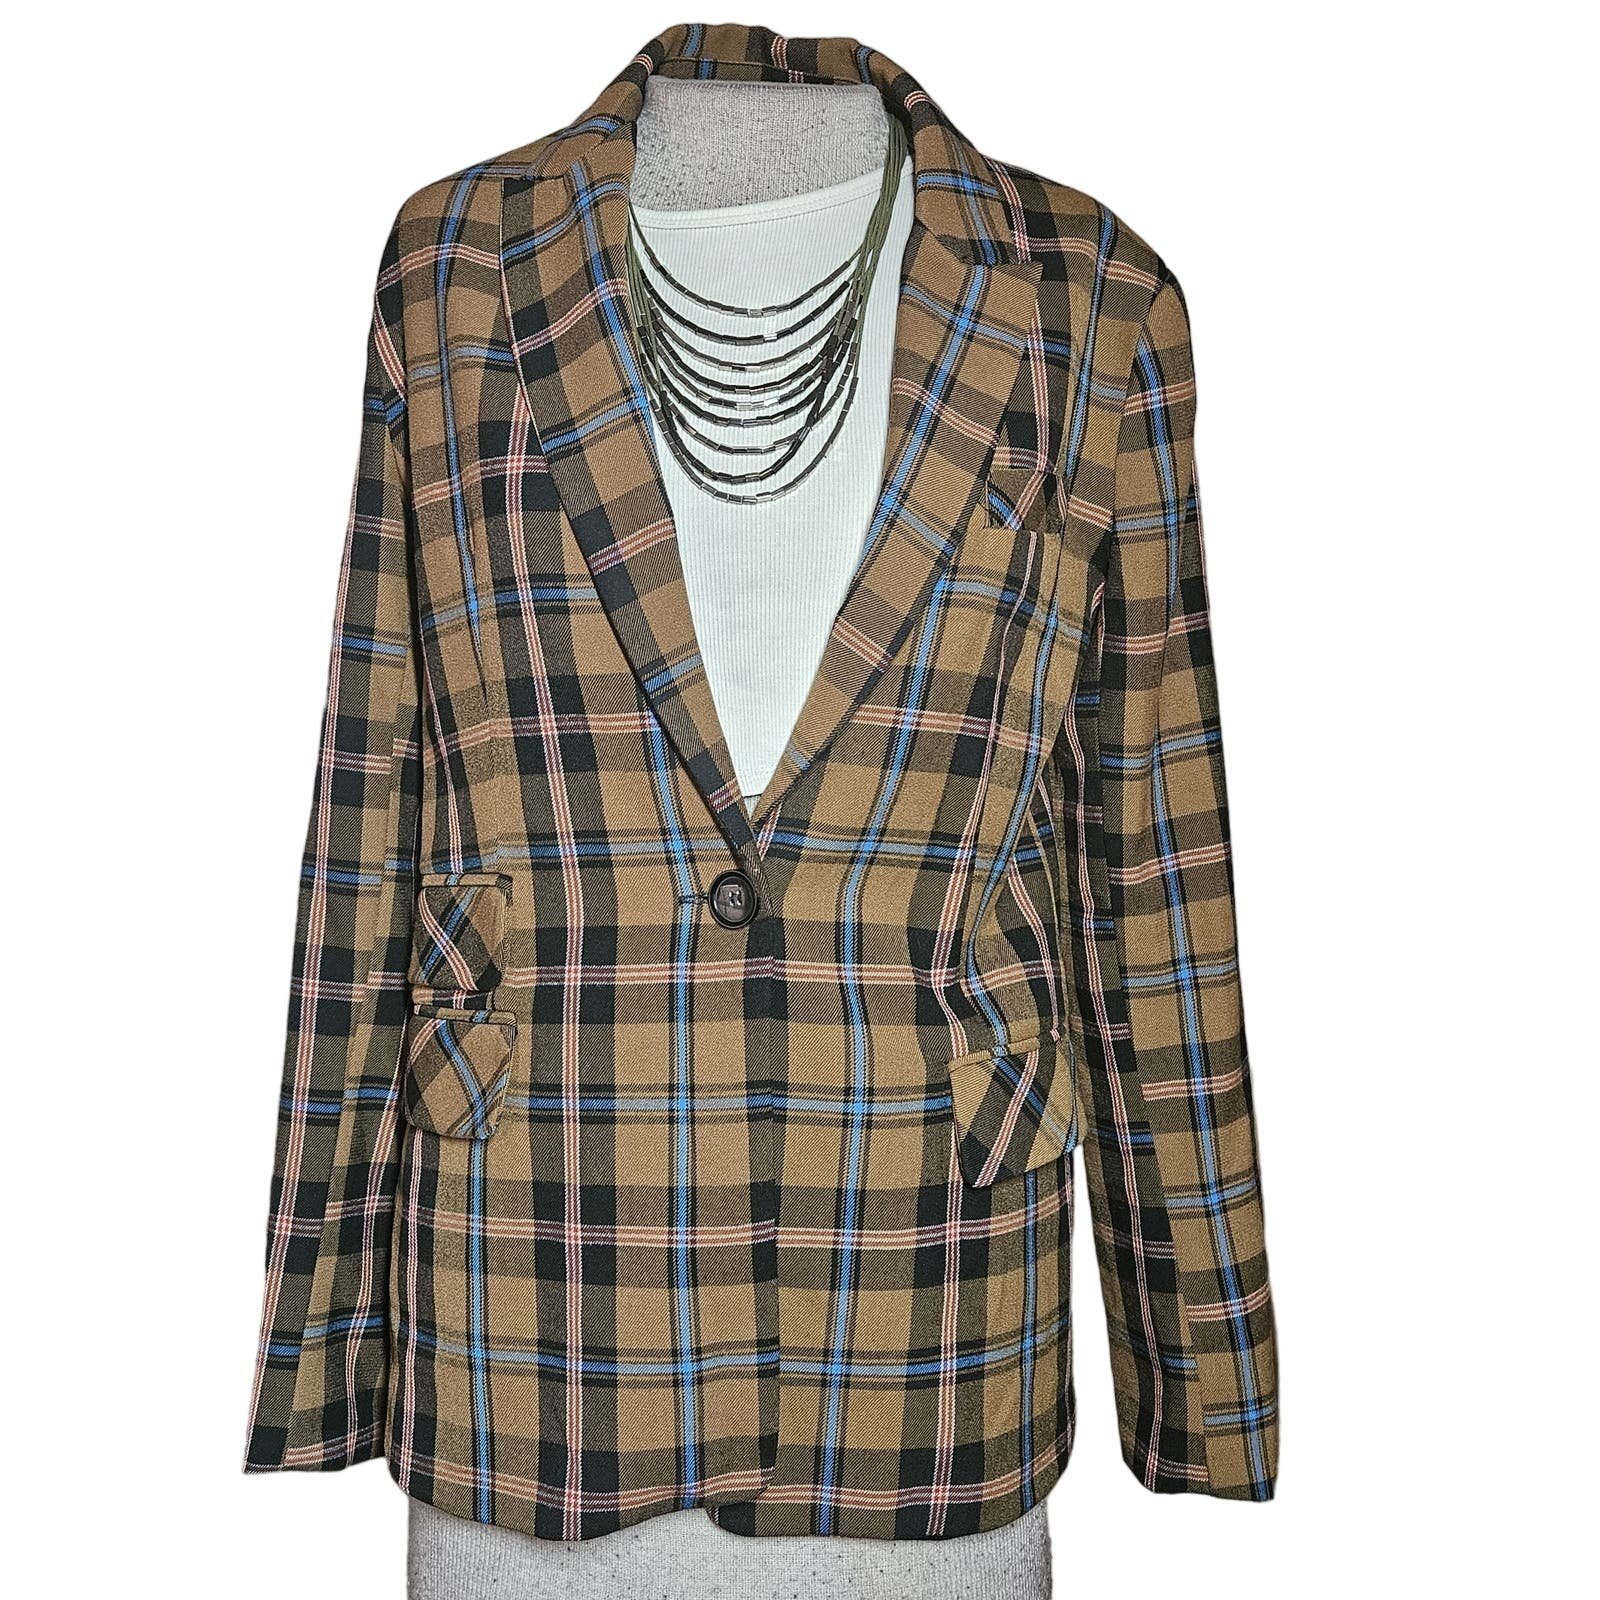 The Best Seller Plaid Blazer Jacket Size Small mmk8TOGs